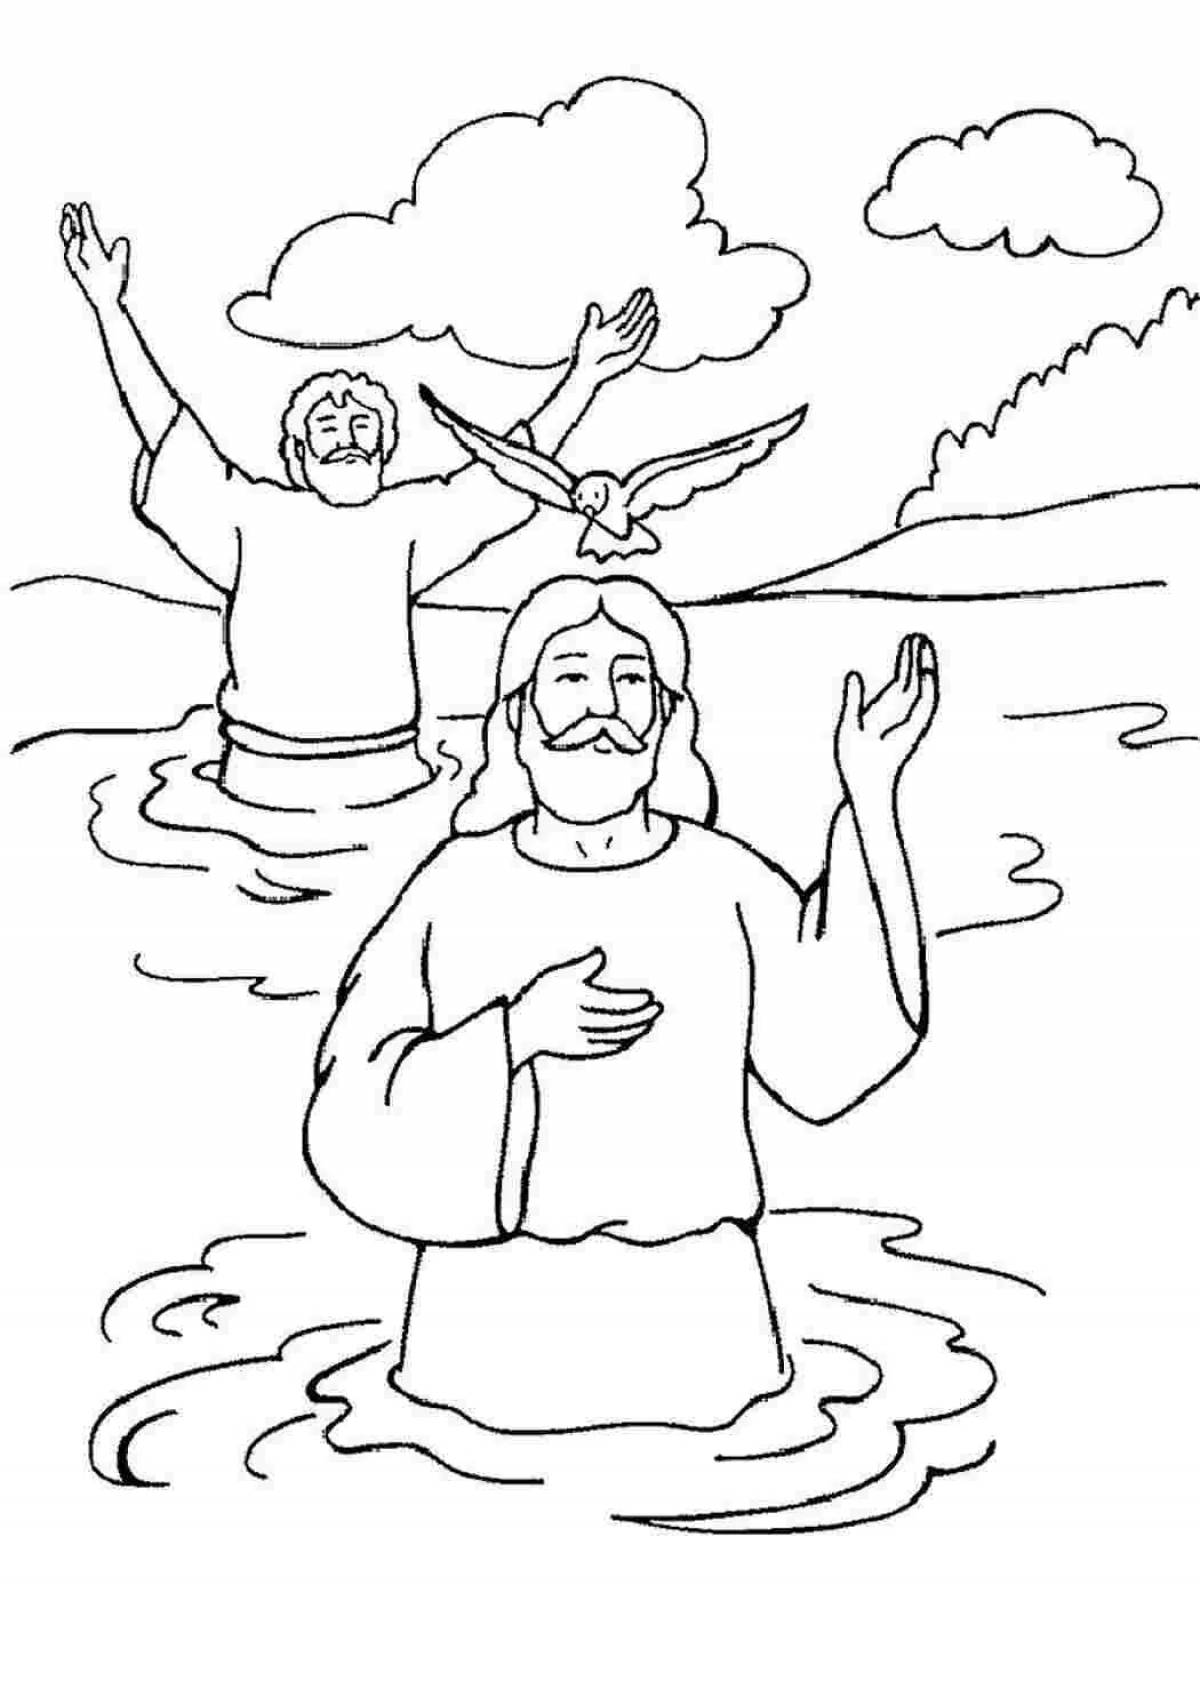 Colorfully exalted jesus baptism coloring page